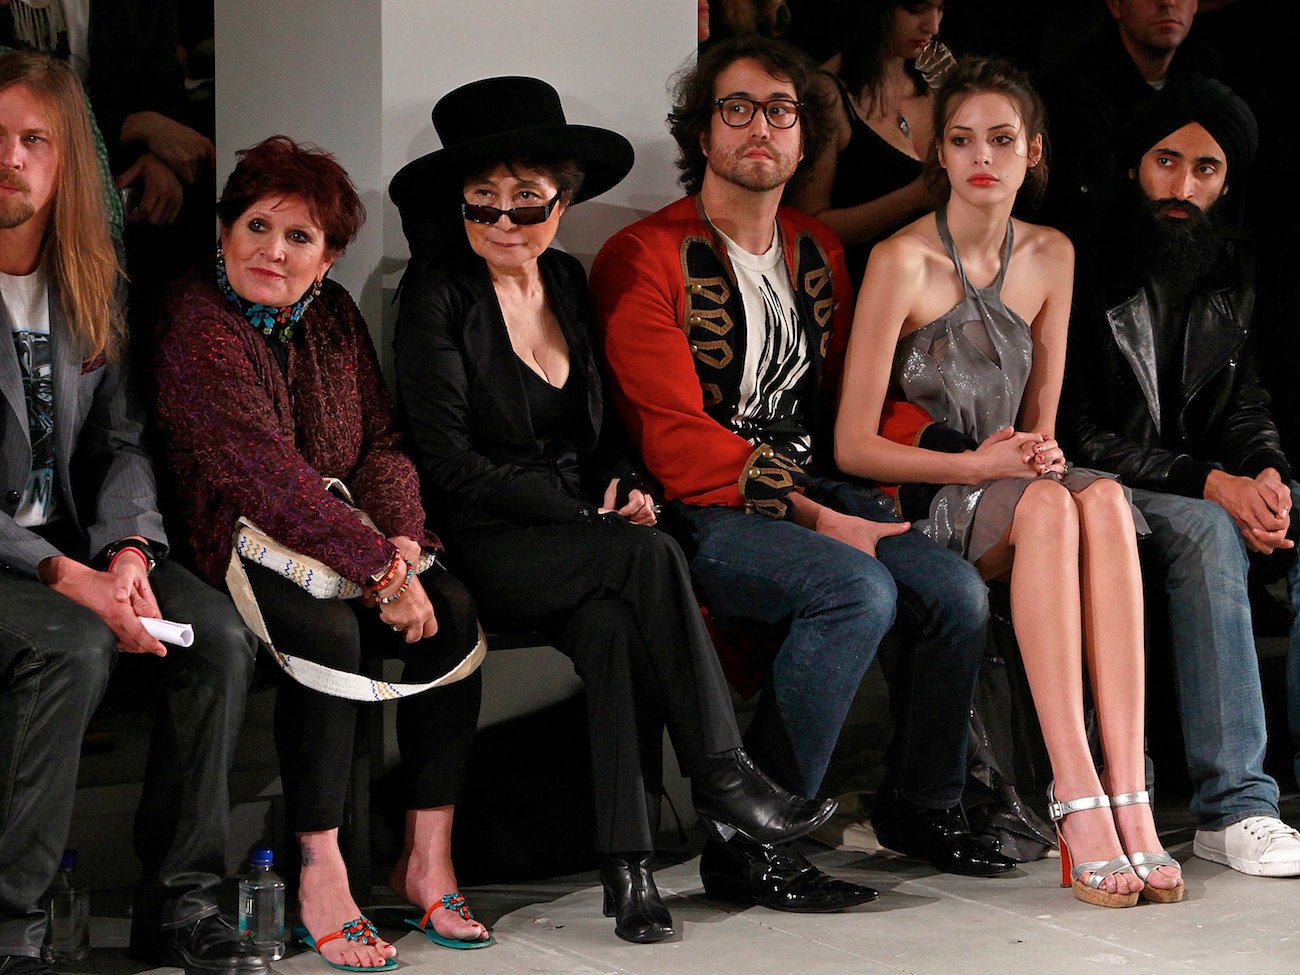 Carrie Fisher, Yoko Ono, and Sean Lennon at the Mercedes-Benz Fashion Week in 2009.